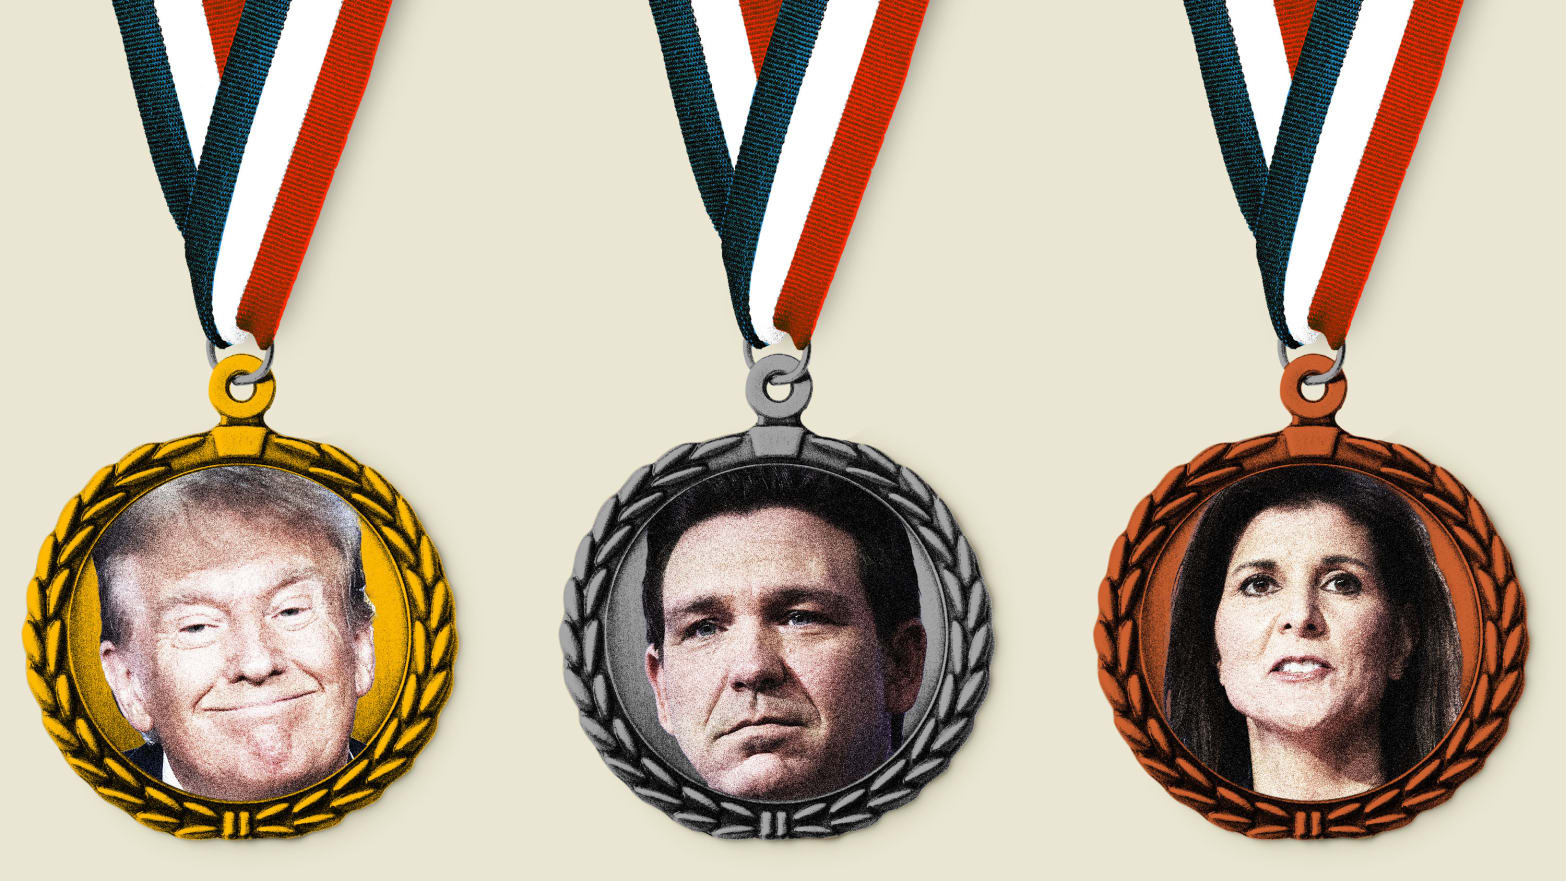 Photo illustration of a gold, silver, and bronze medal with Nikki Haley, Donald Trump and Ron DeSantis’s faces on them.